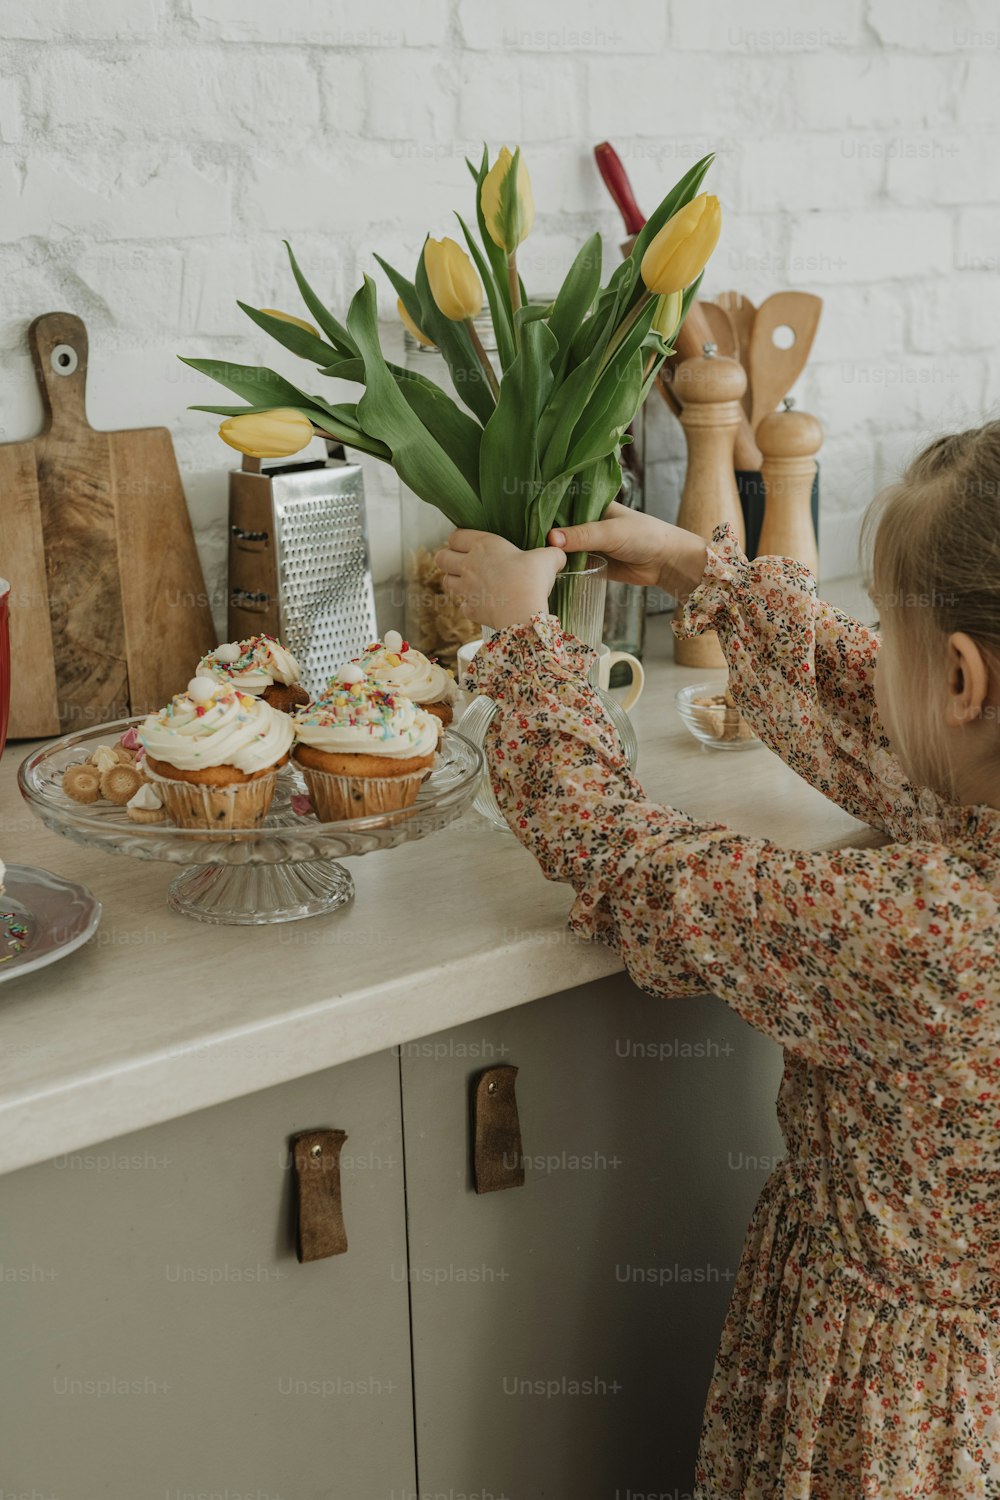 a little girl reaching for some cupcakes on a counter